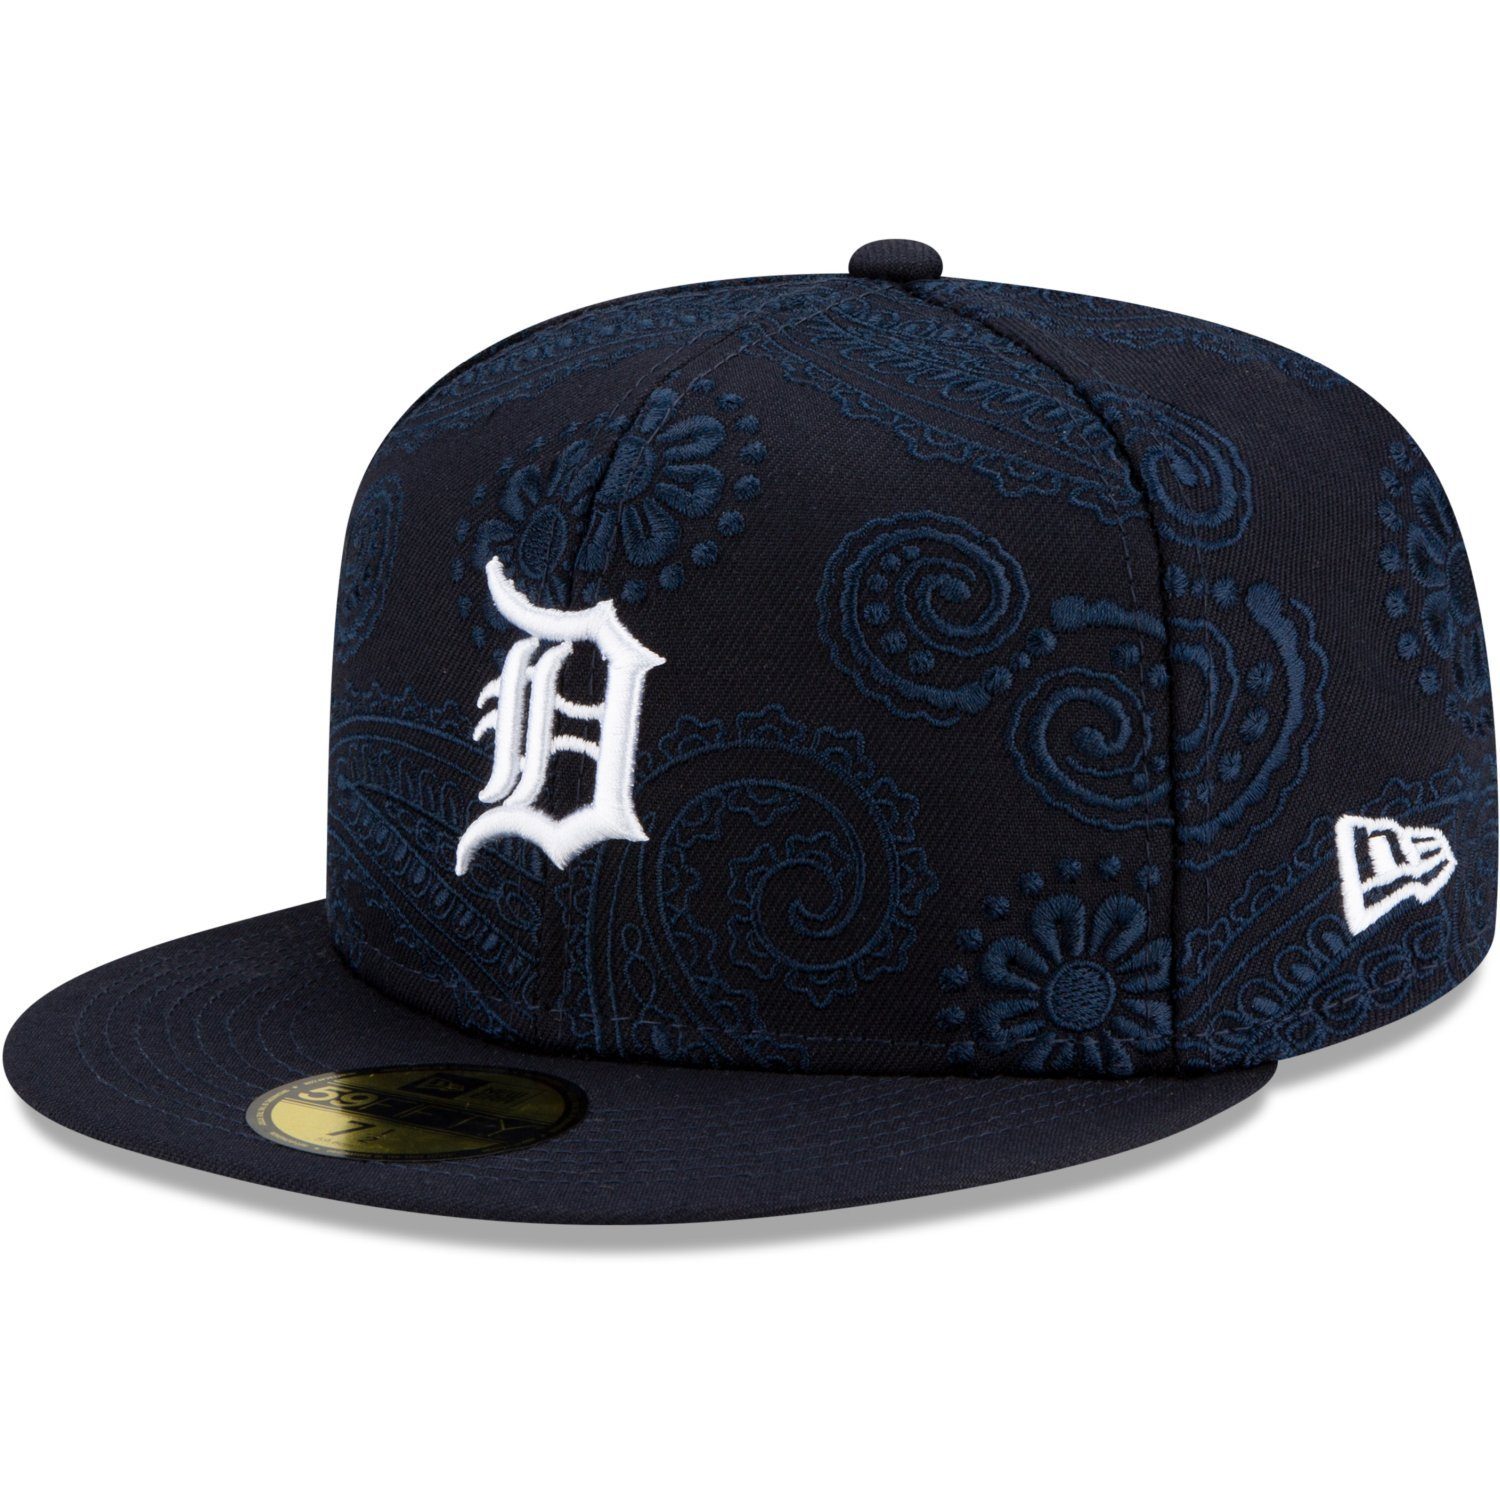 New Era Fitted Cap 59Fifty SWIRL PAISLEY Detroit Tigers